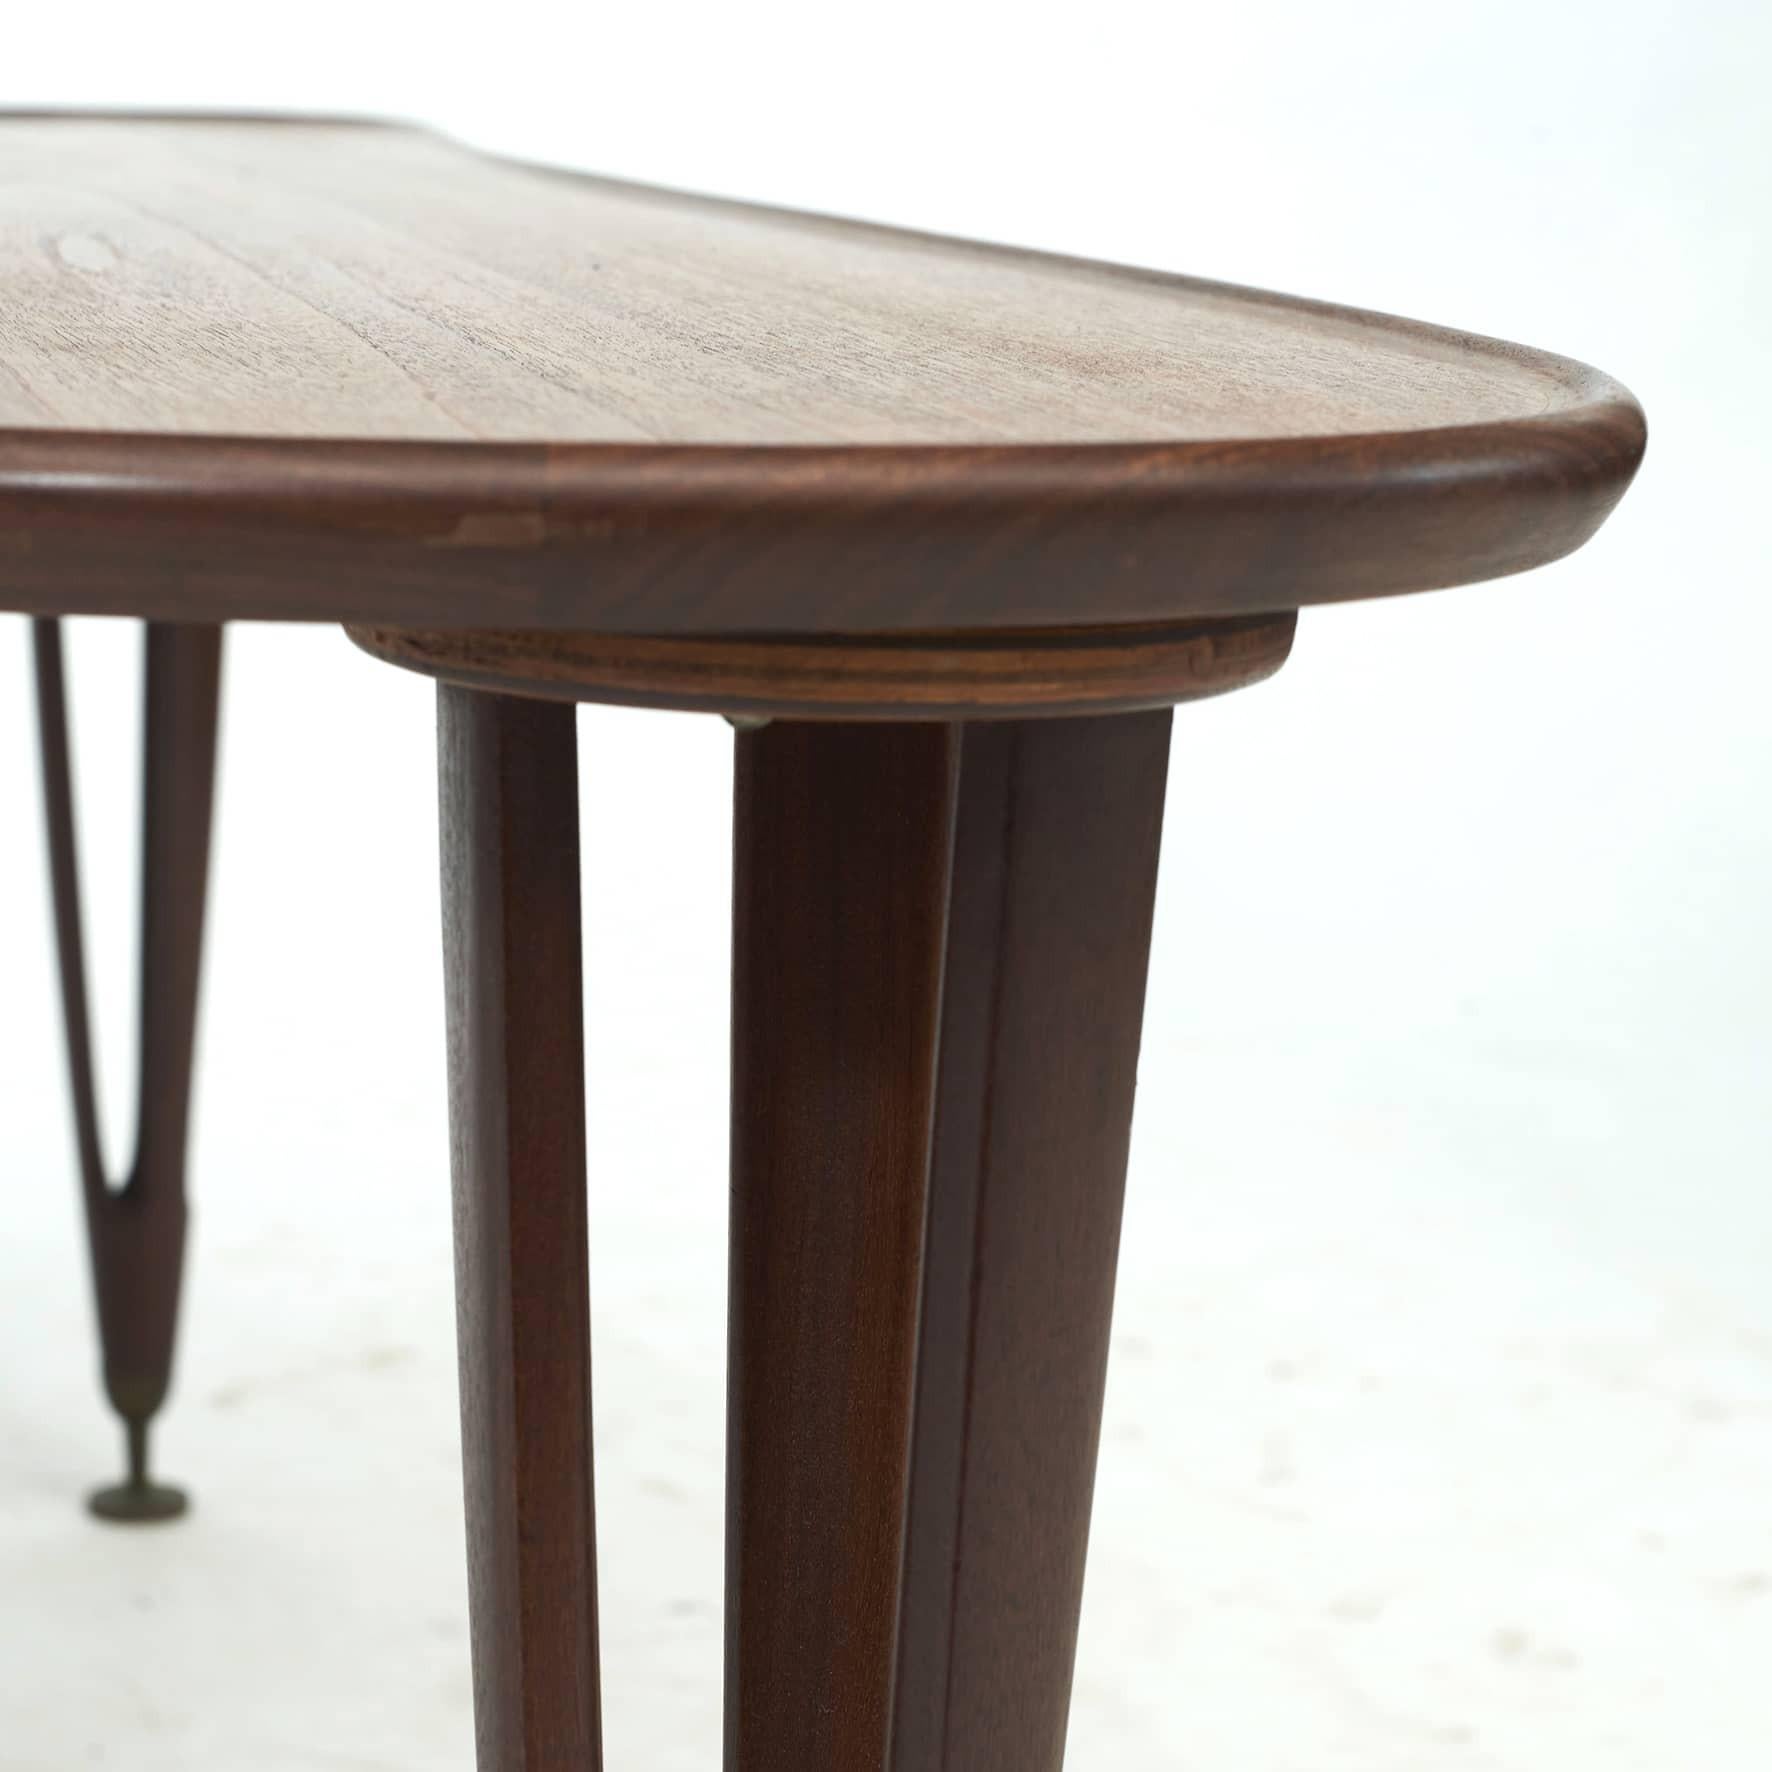 20th Century Danish Mid-Century Organically Shaped Teak Coffee Table by BC Møbler